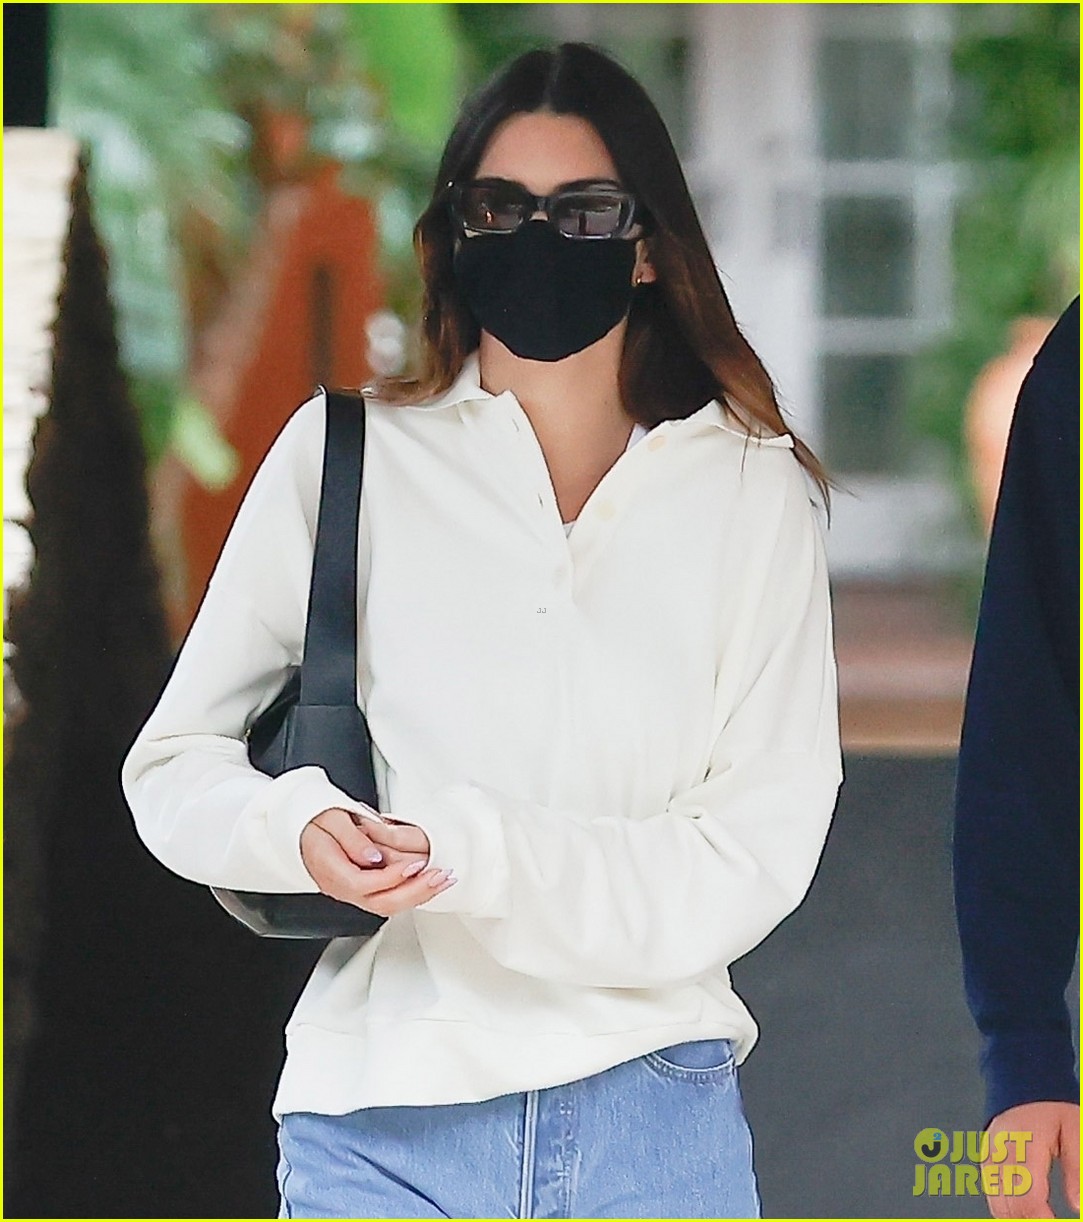 Kendall Jenner Spends Time with Friend Fai Khadra - New Photos! | Photo ...